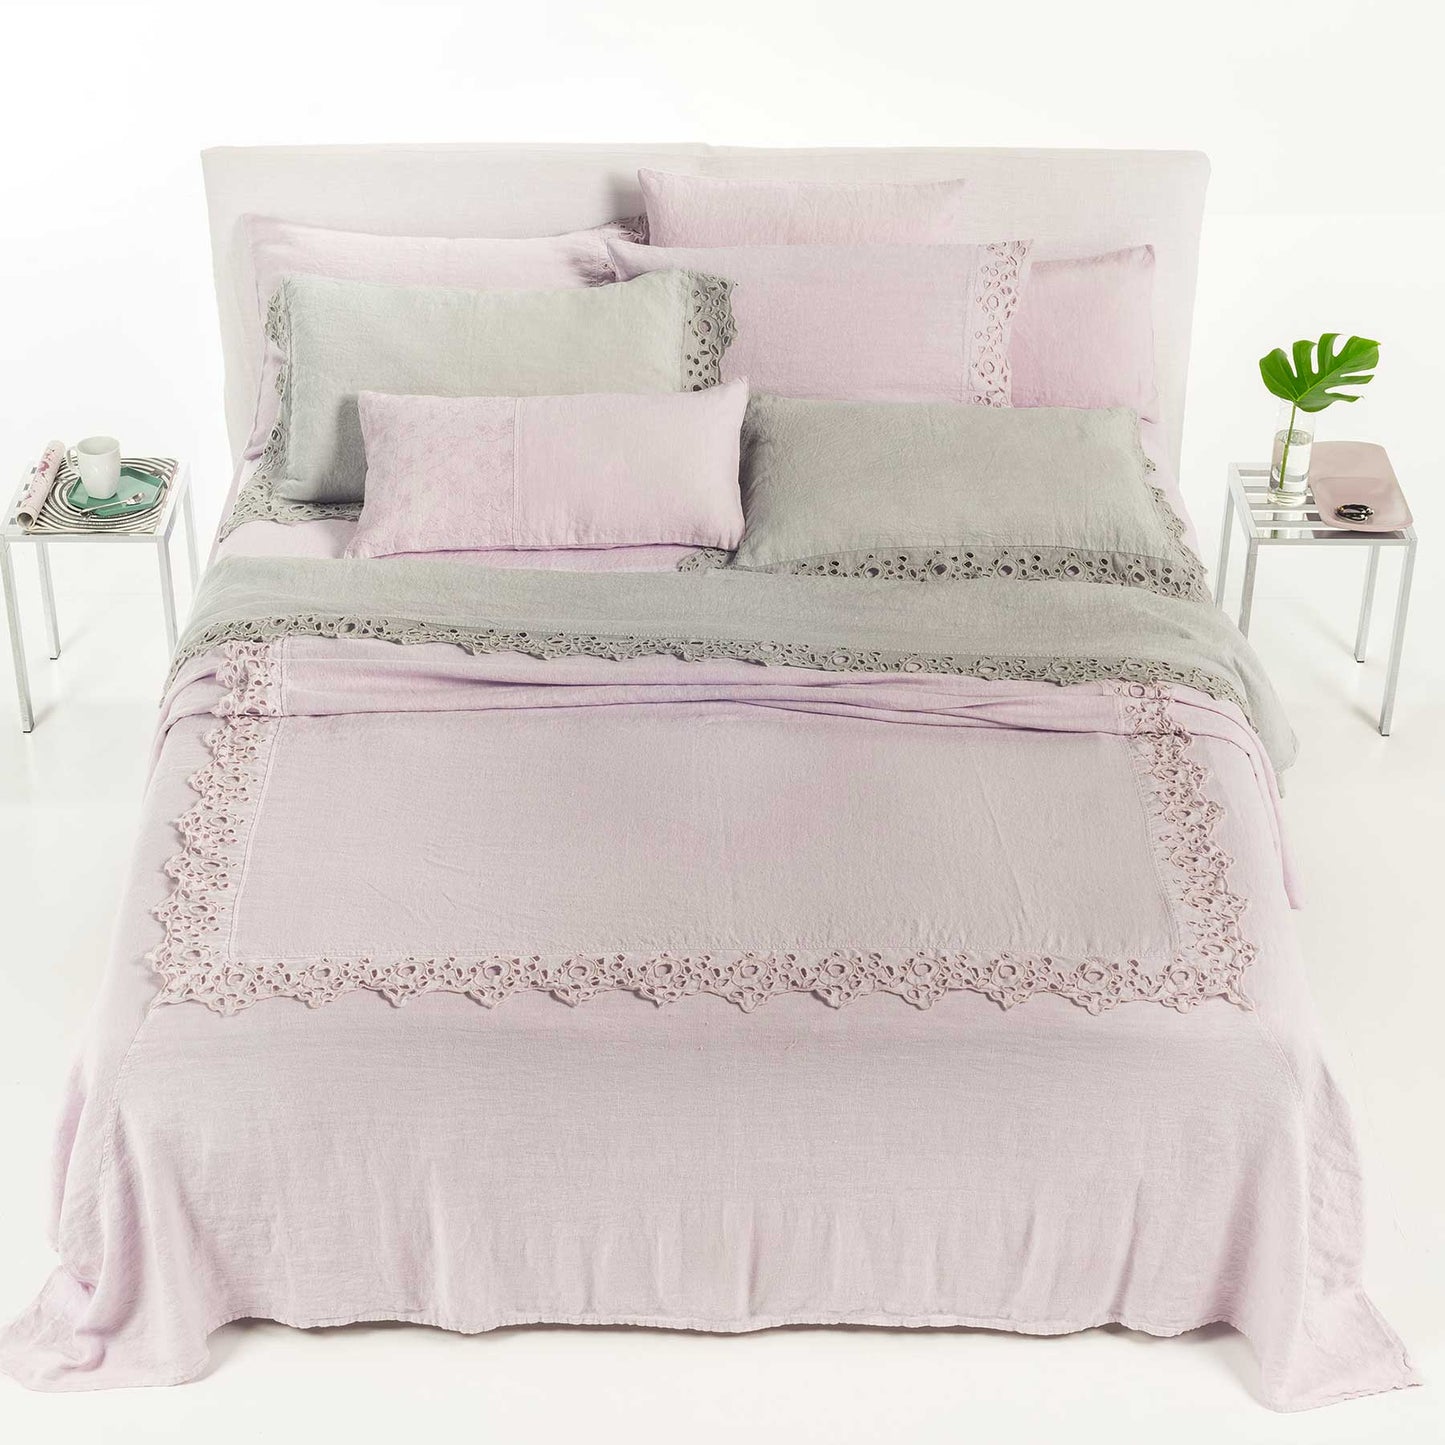 Sheet set + single pillowcases with A'jour embroidery *while supplies last